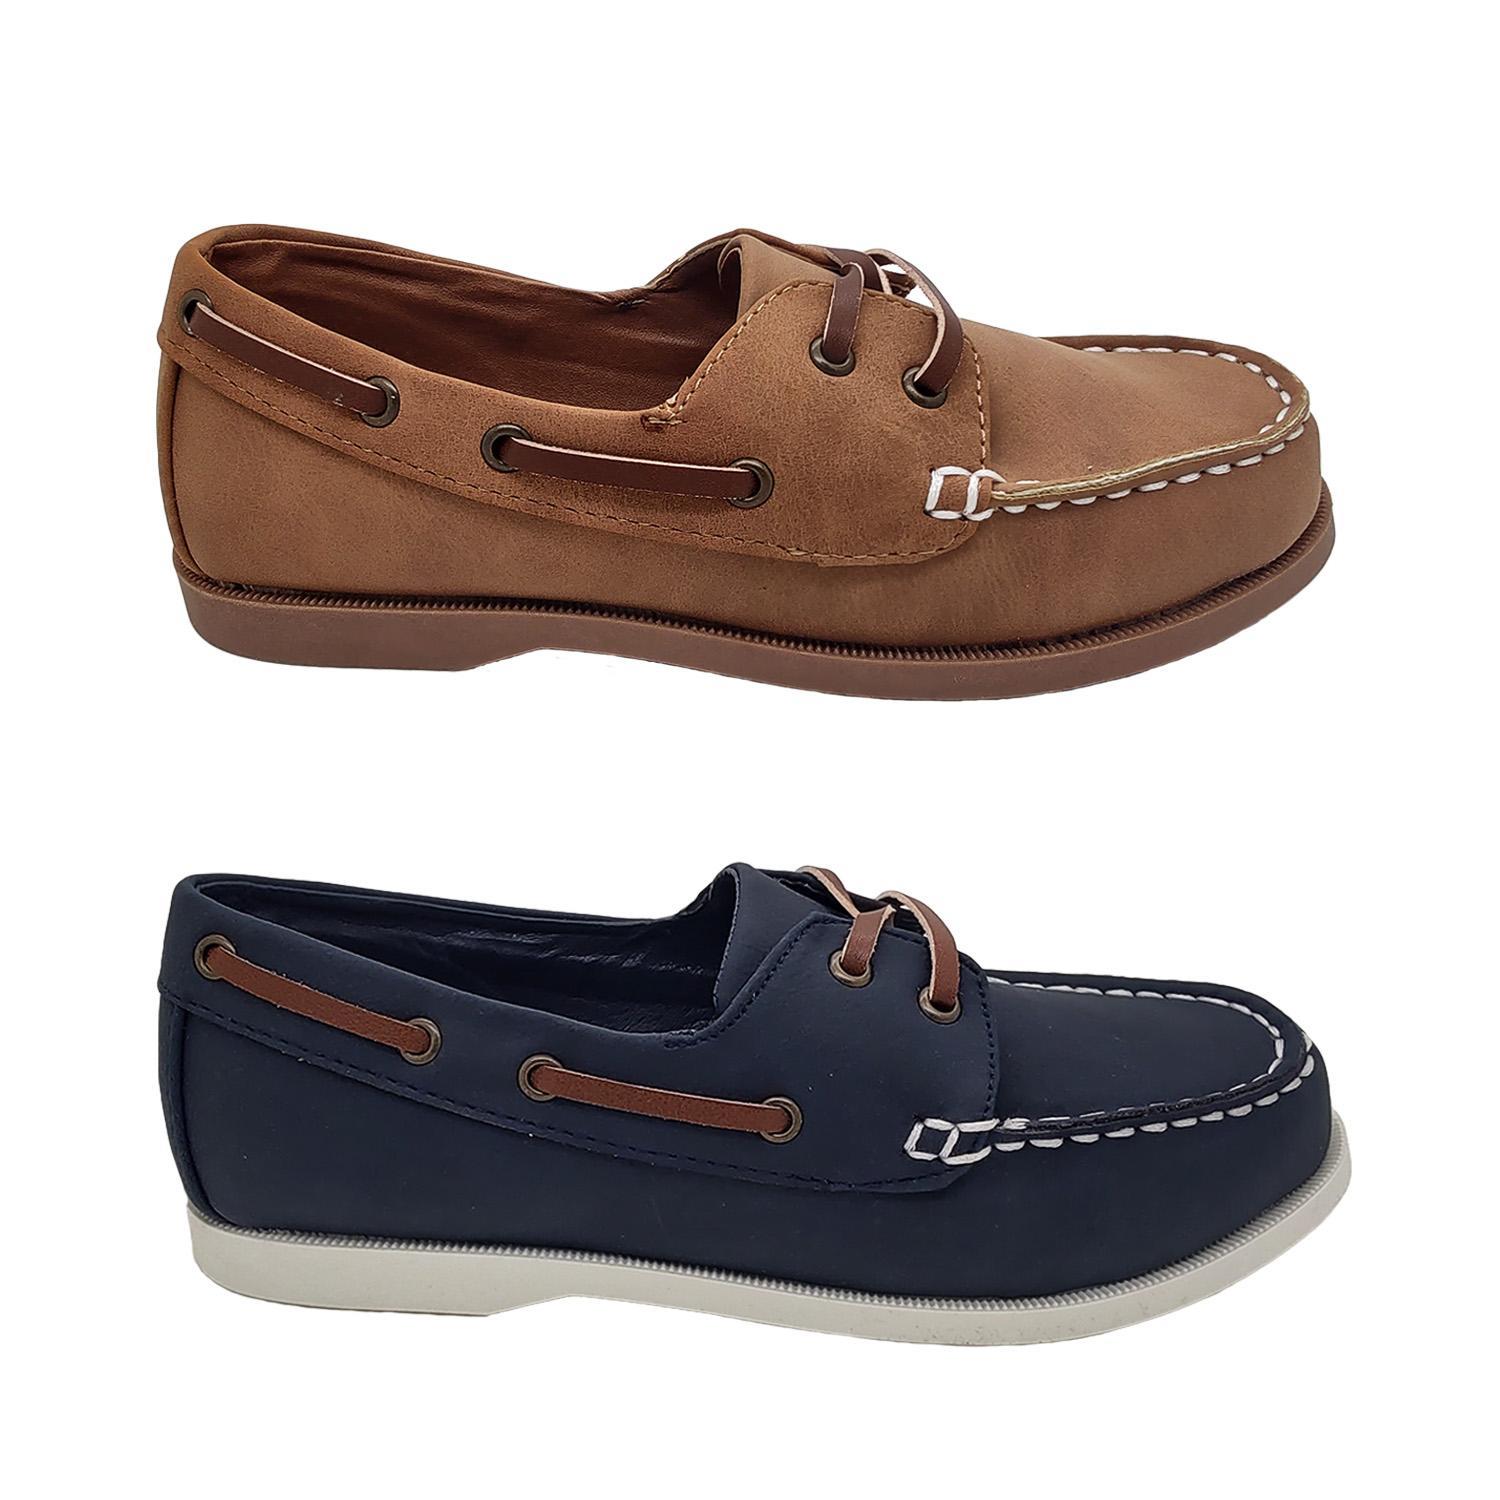 Grosby Adrian Boys Shoe Classic Summer Boat Shoes Lace Up Stitching Detail-Navy-13